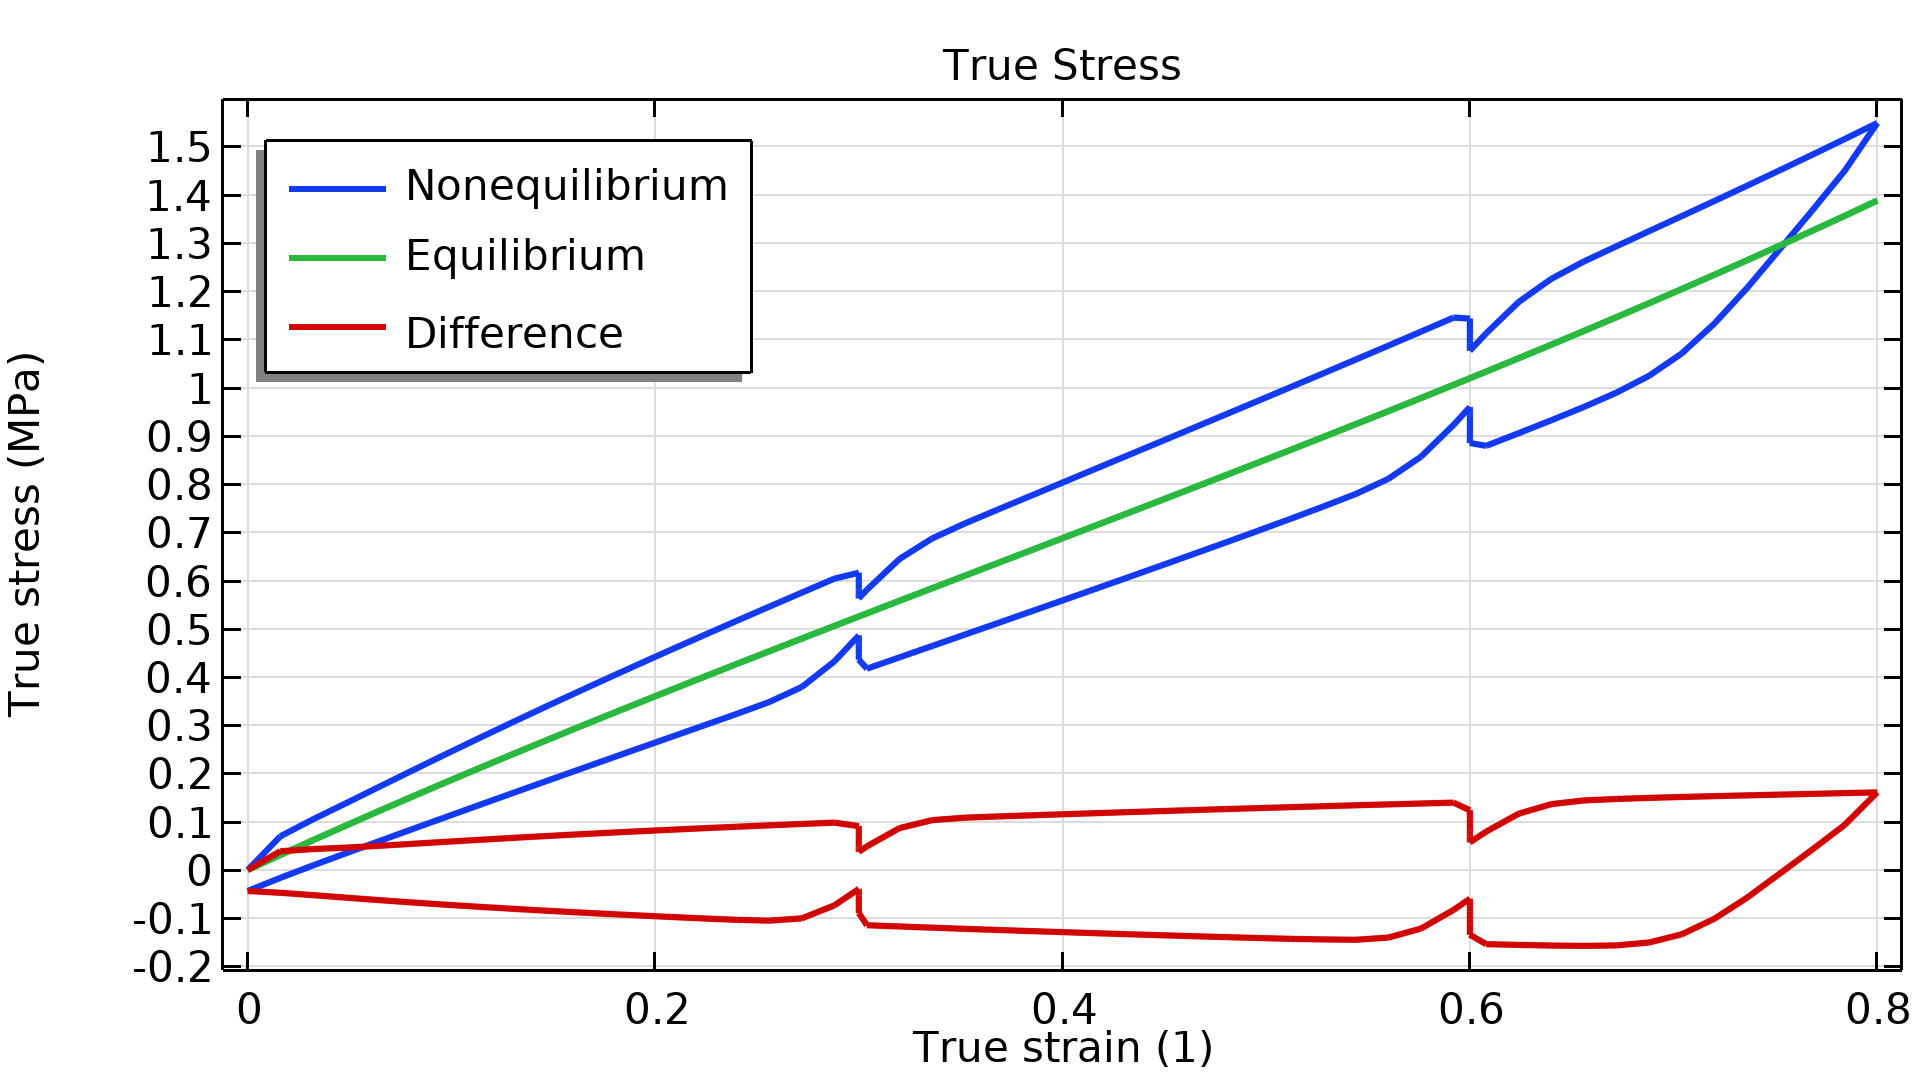 A 1D plot showing the true stress with red, green, and blue lines.